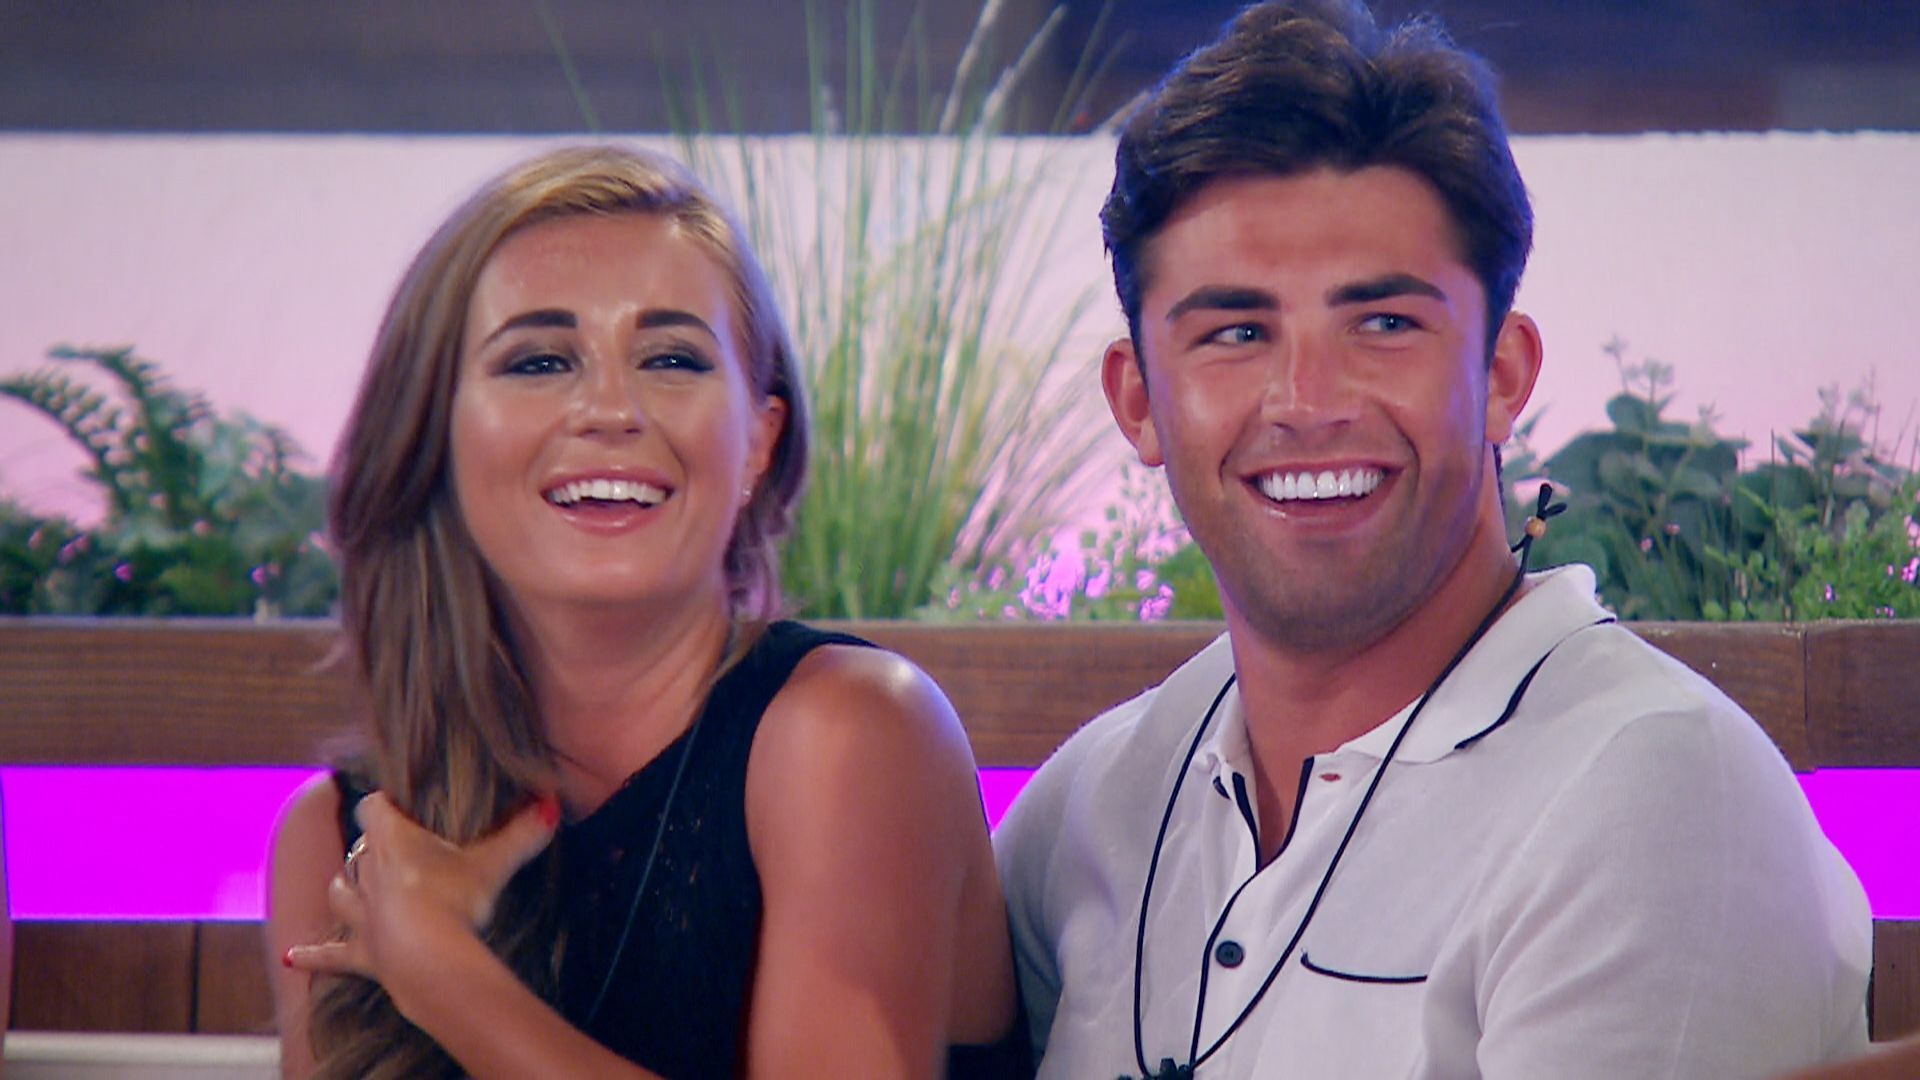 10 Best Love Island UK Couples Of All Time According To Reddit